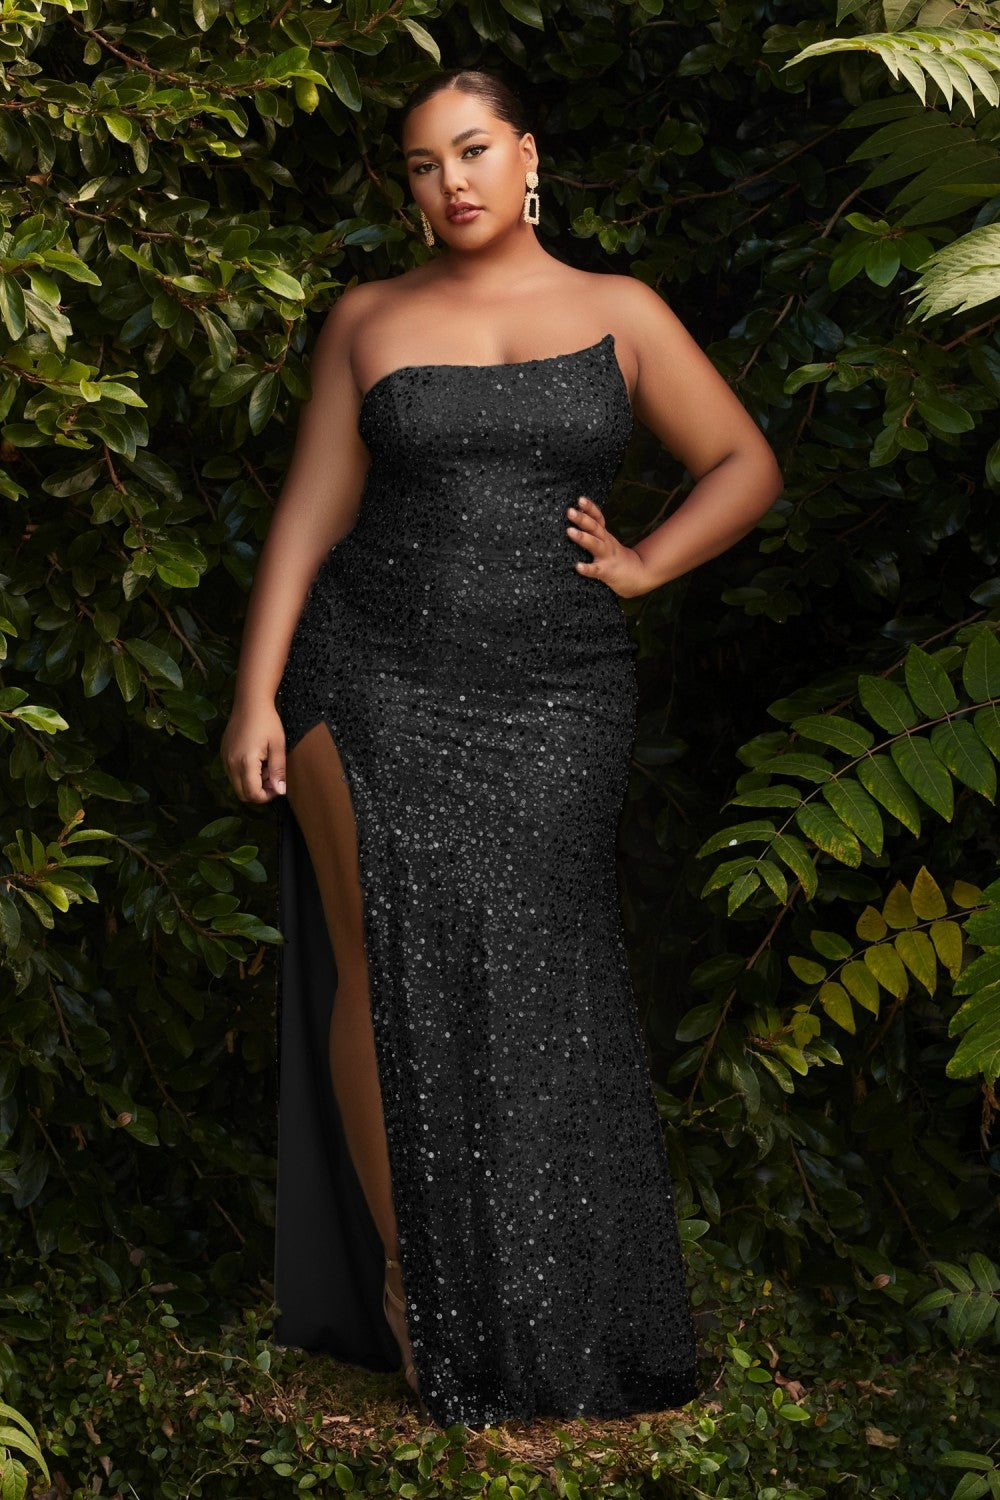 Fitted Assymetrical Glittery Curve Luxe Gown Embellished with sequins Plus Size Prom & Bridesmaid Dress with High Leg Slit CDCH165C Elsy Style Prom Dress